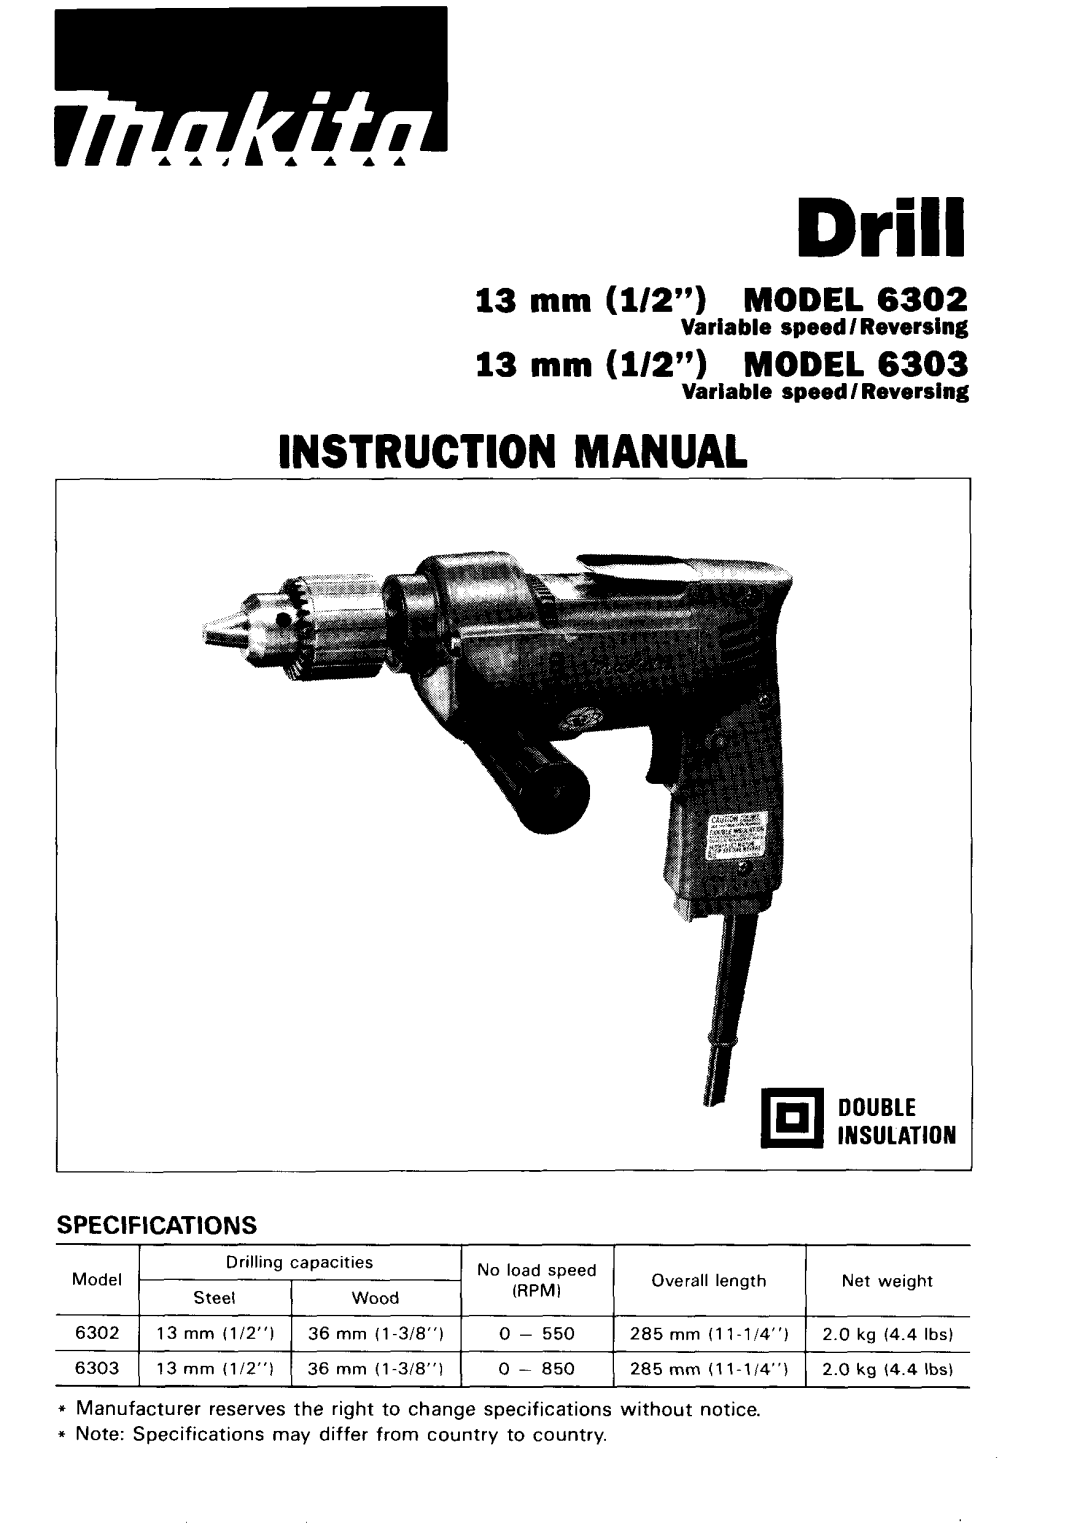 Makita 6303 specifications Drill, Instruction Manual, 13 mm 1/2MODEL, Double, Specifications, Variable speed/ Reversing 